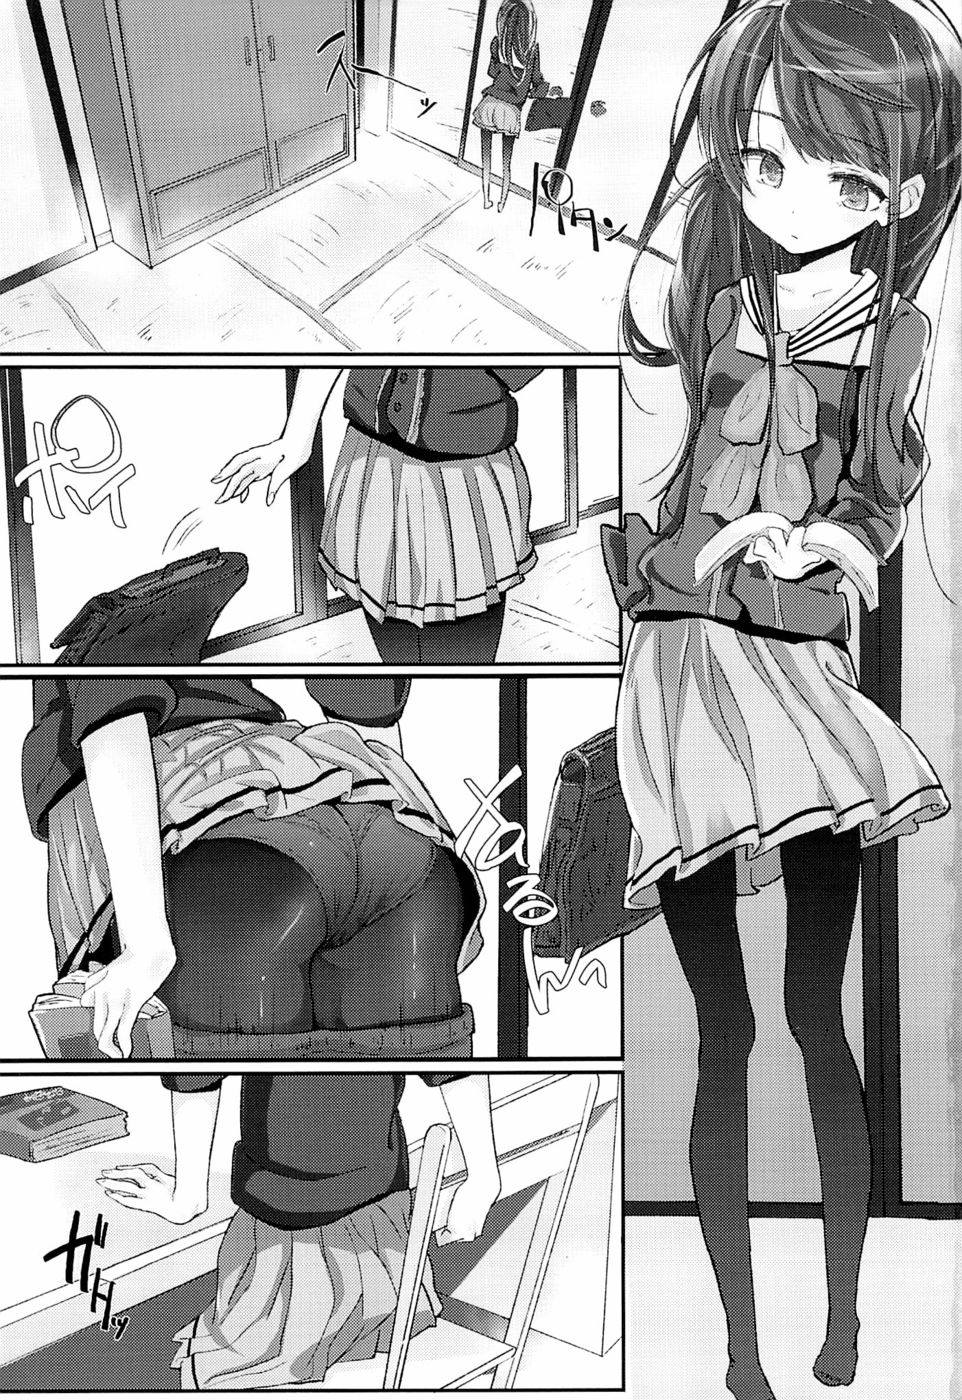 Hentai Manga Comic-Beyond the mouth of the uterus lies Onii-chan's demise-Read-2